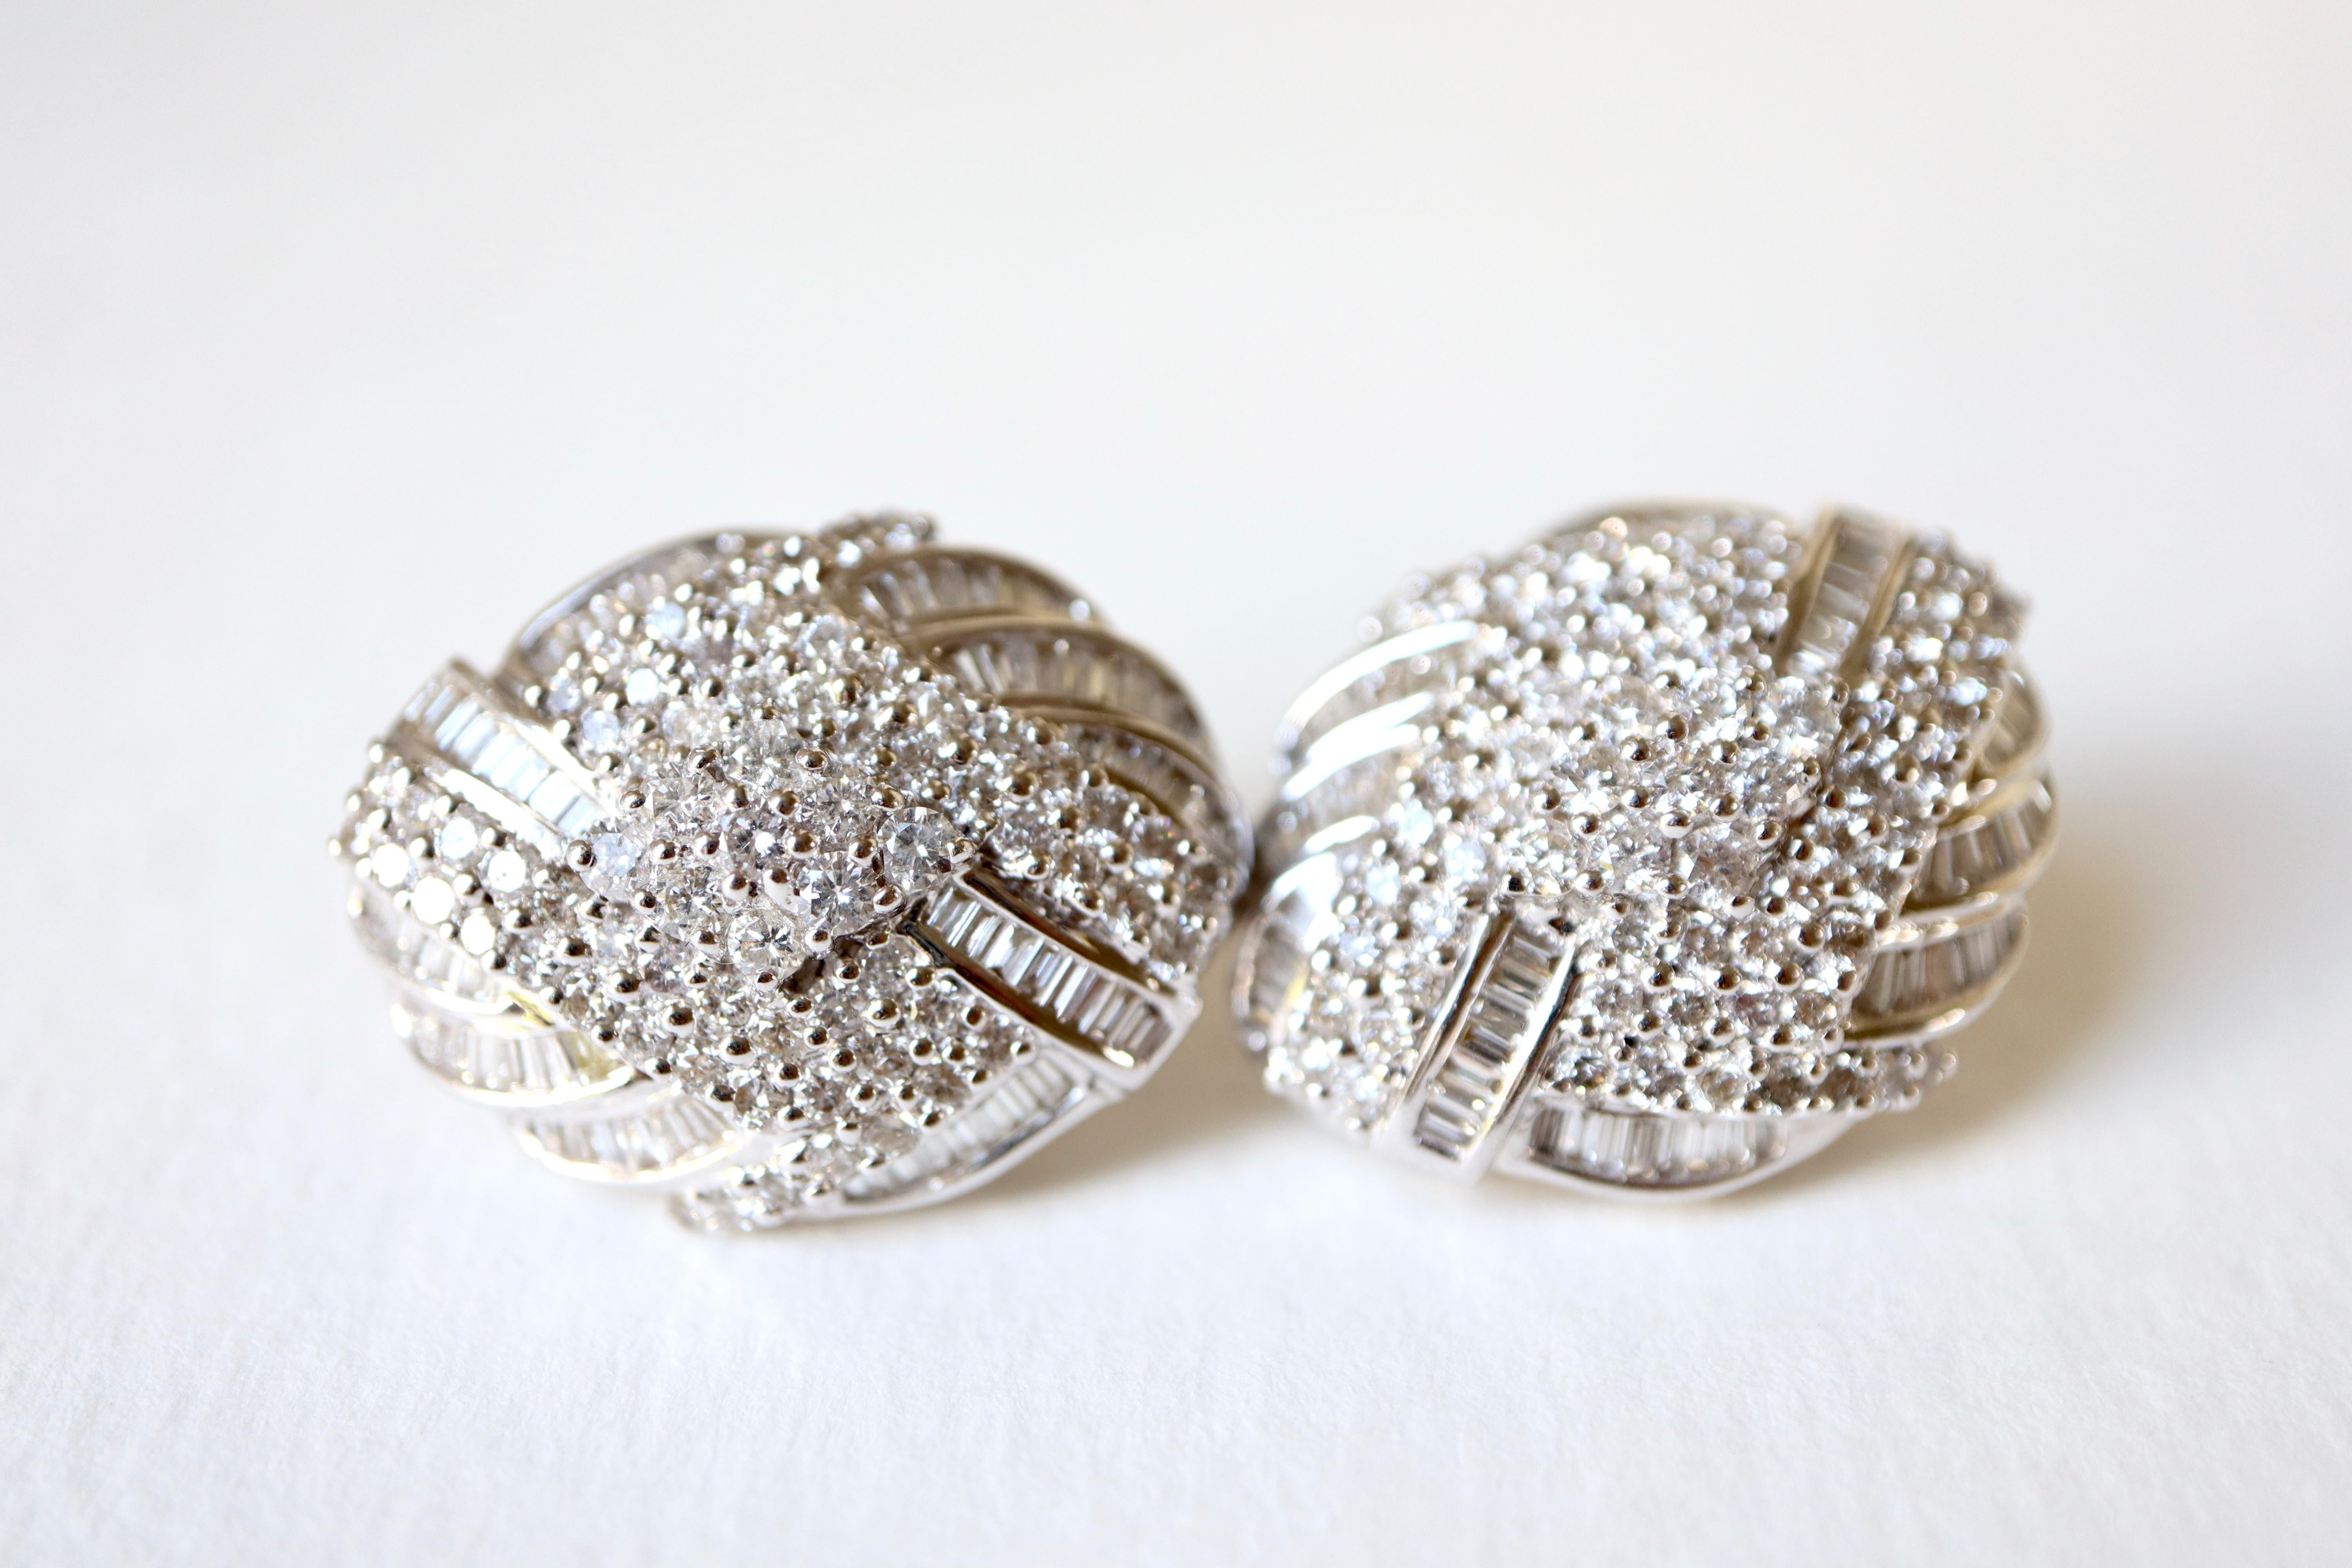 Diamonds Clip Earrings 18 Carat White Gold Set with 4 Carats of Diamonds For Sale 1